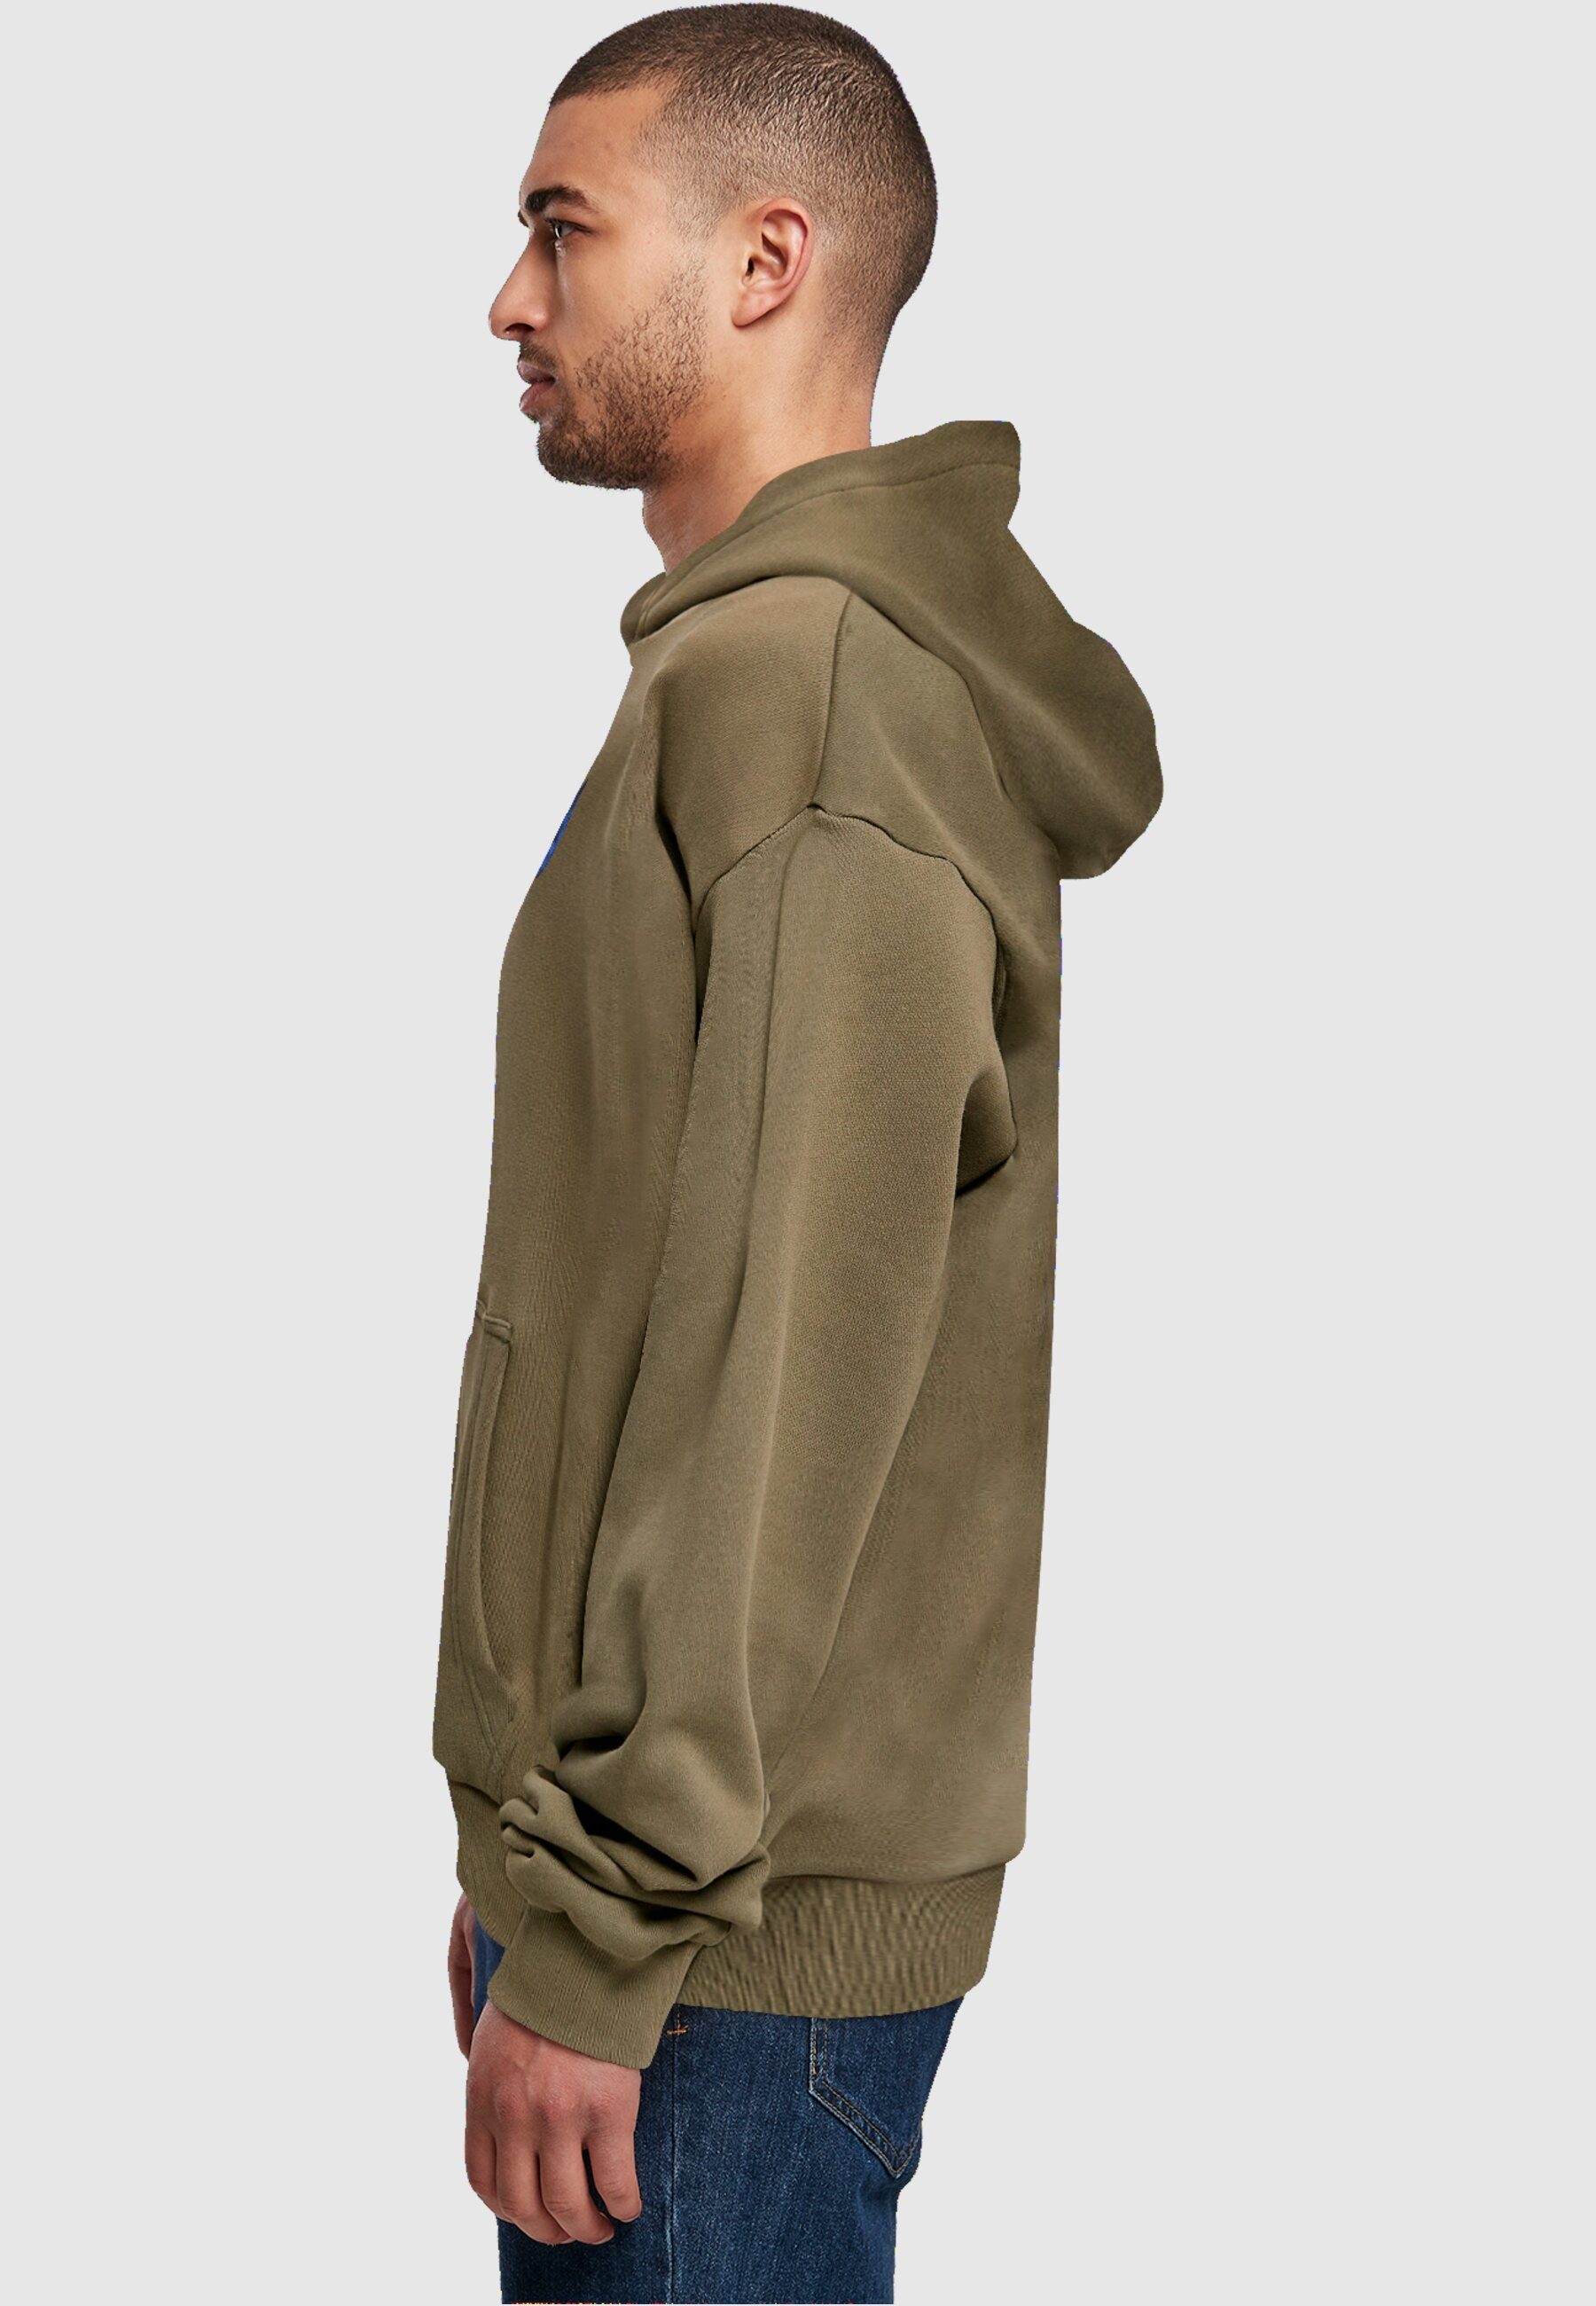 olive Tee Herren Hoody Sweater (1-tlg) Upscale Heavy Le Mister by Papillon Oversize